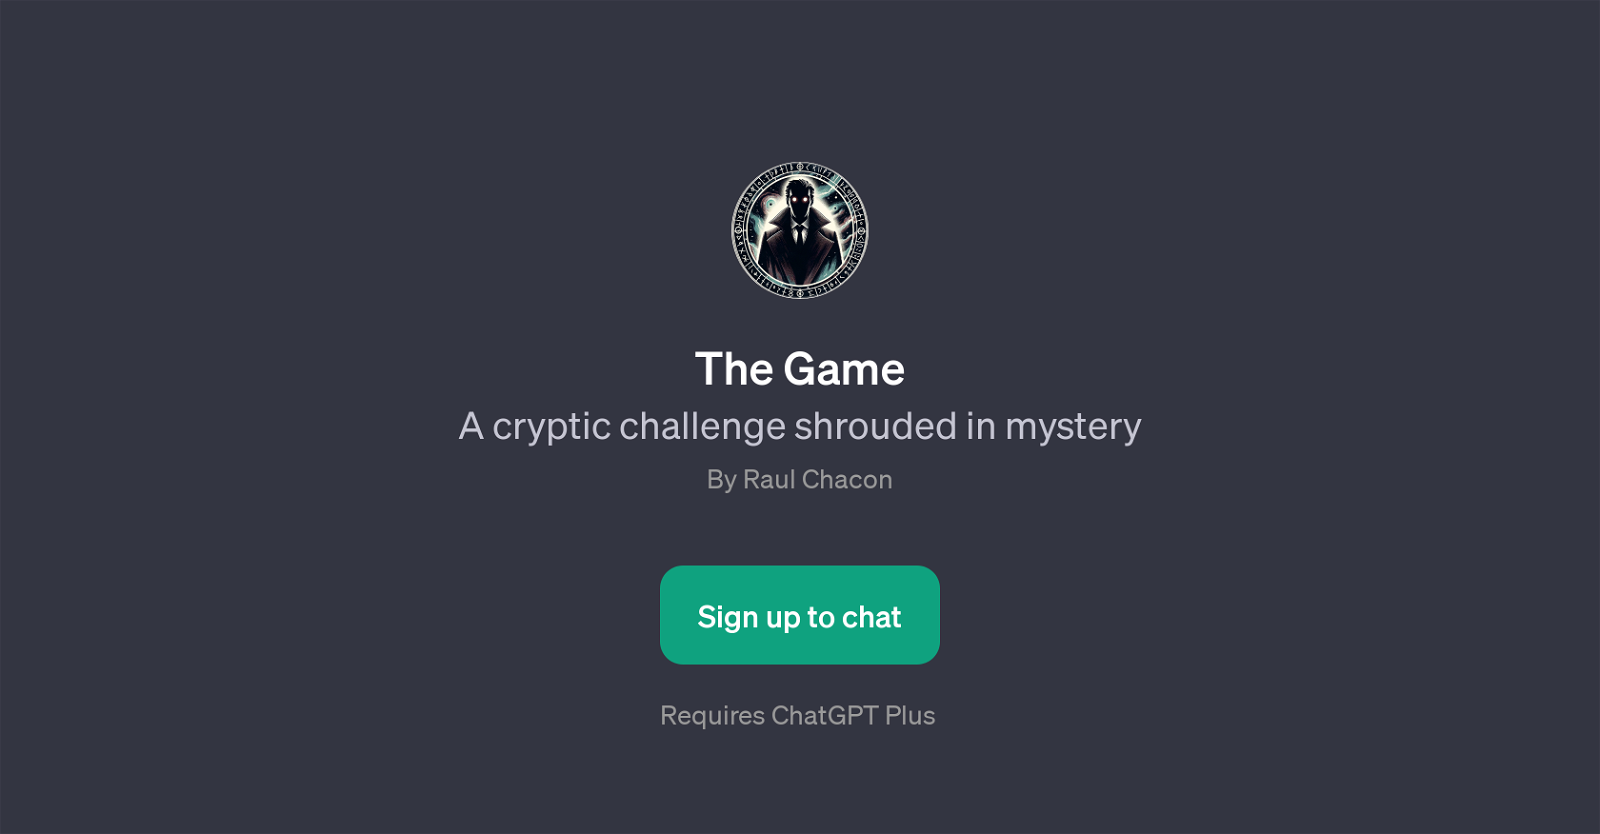 The Game website